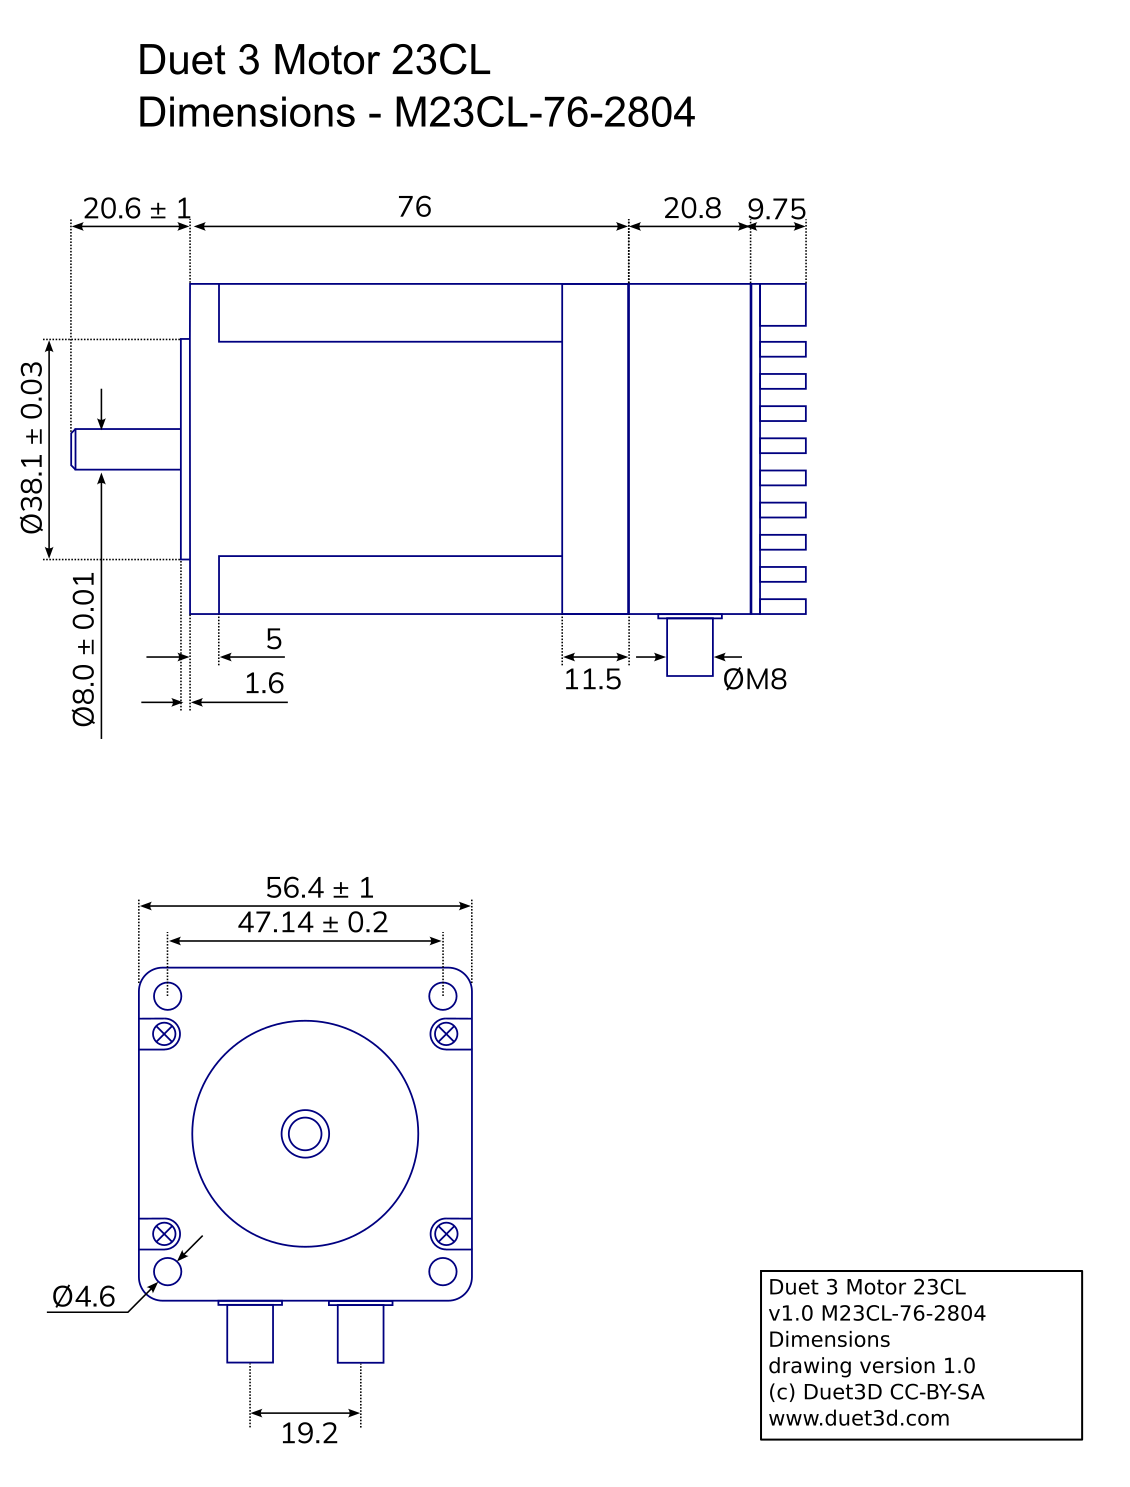 Image showing the key dimensions of the Duet 3 motor 23CL v1.0 without brake - M23CL-76-2804